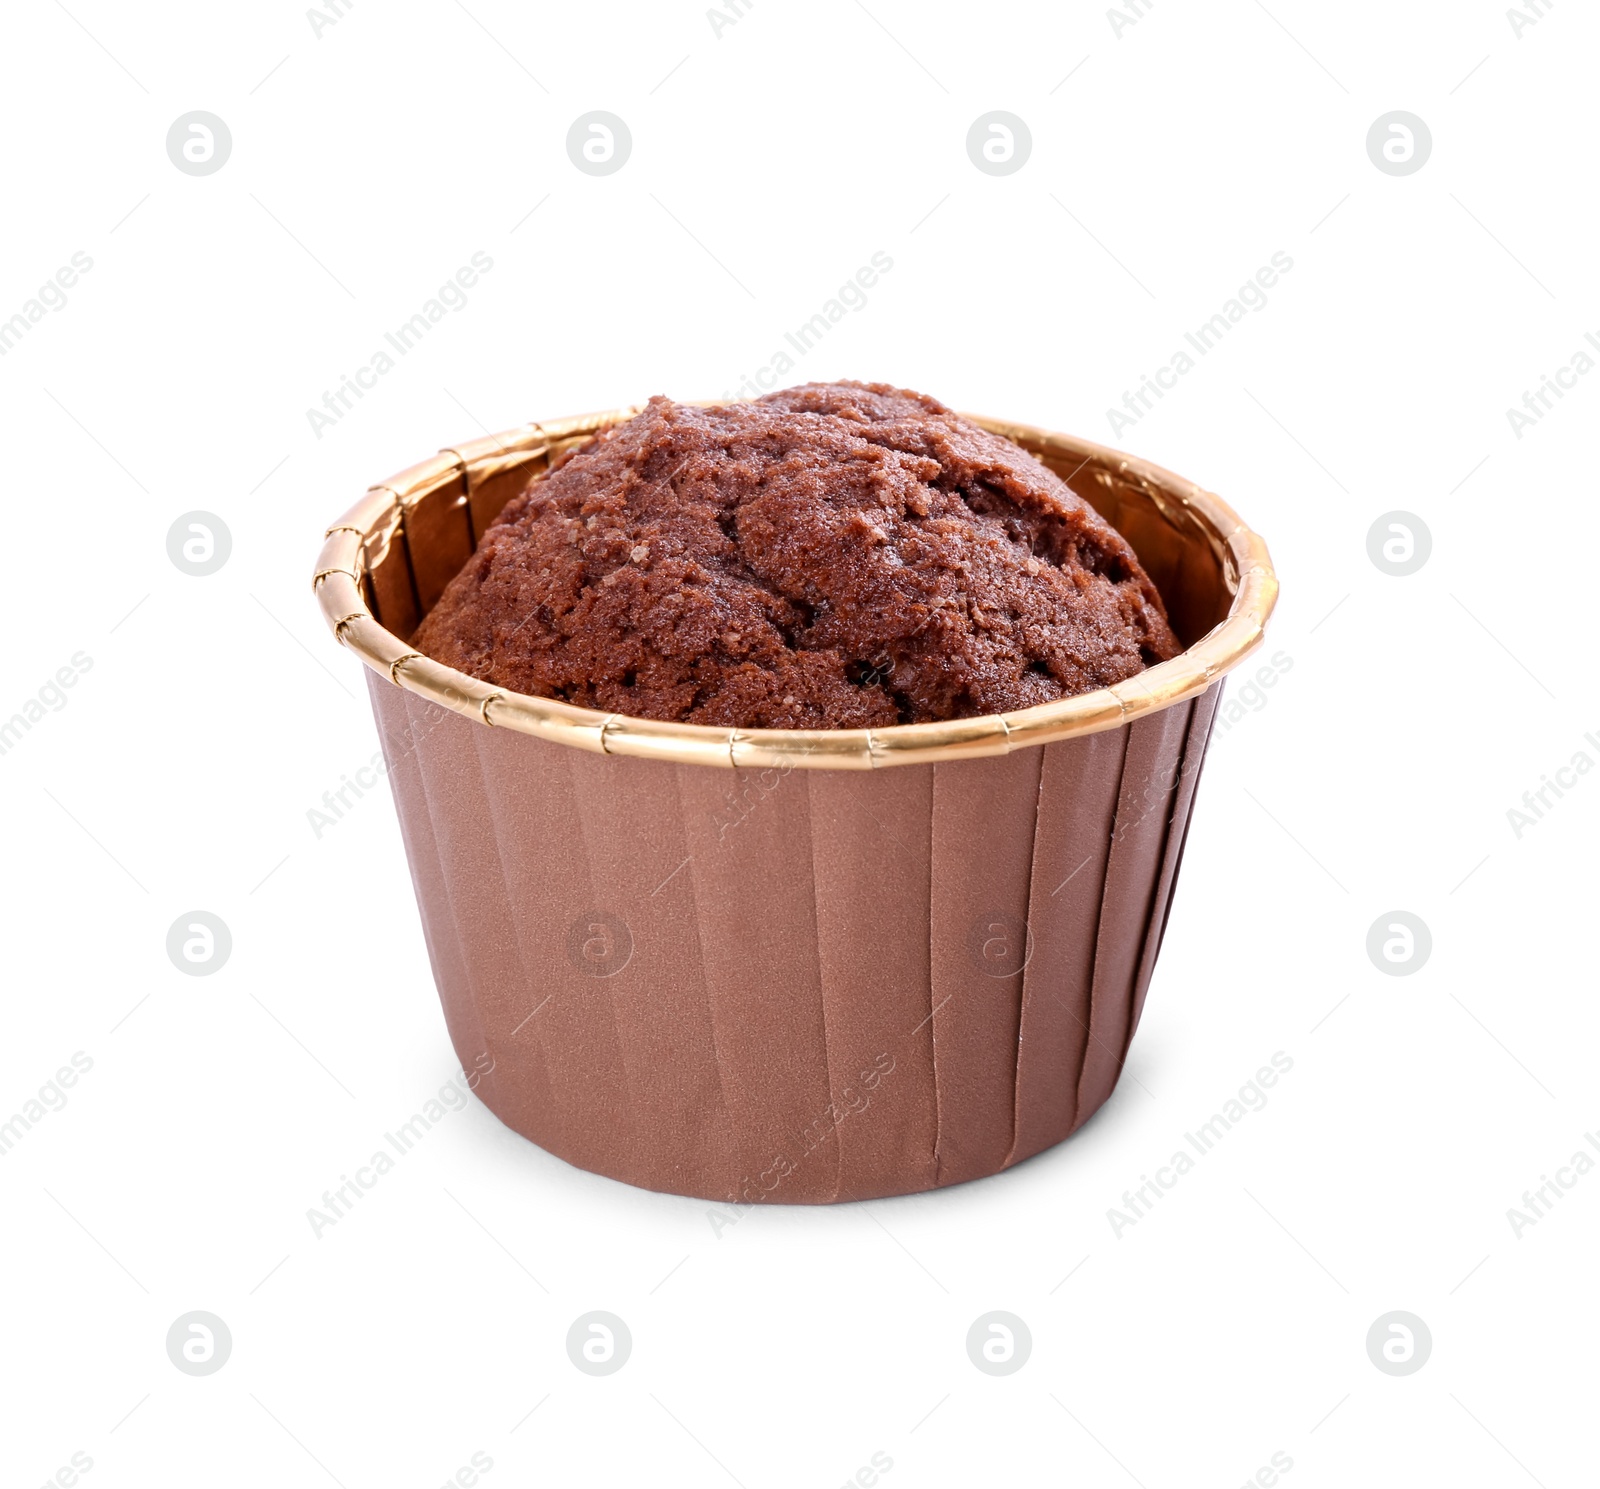 Photo of One delicious chocolate cupcake isolated on white